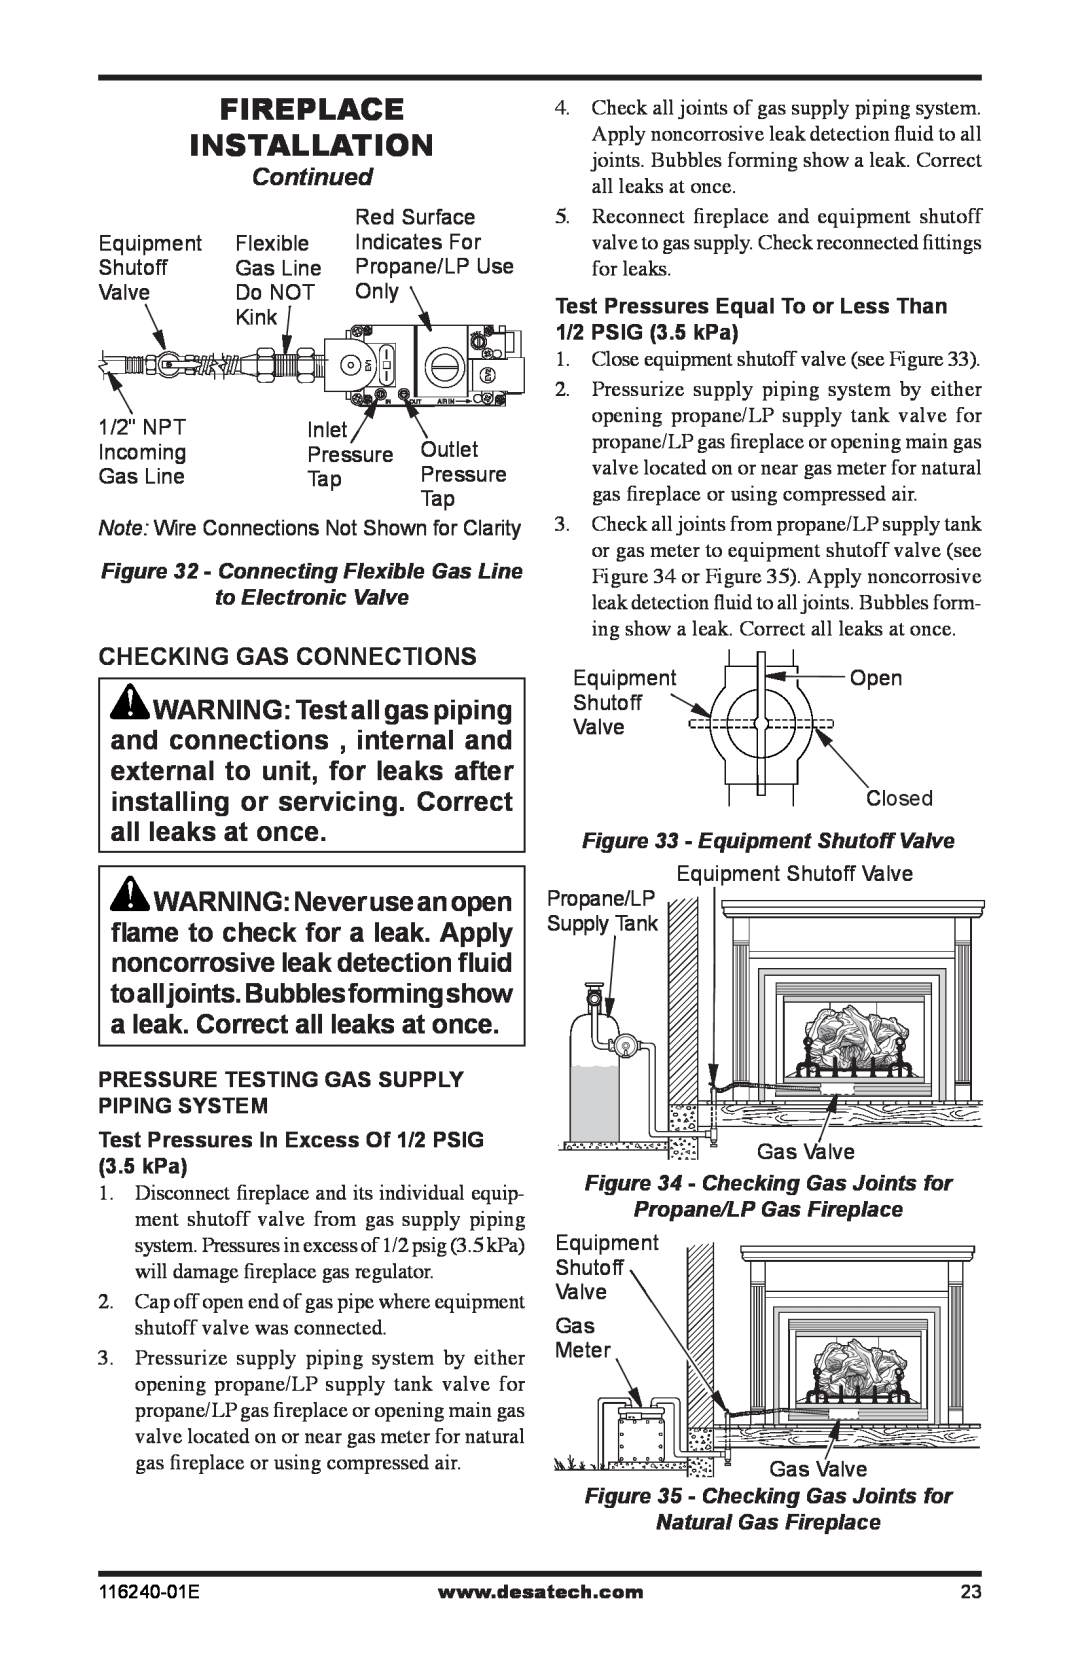 Desa (V)KC42PE installation manual Continued, Checking Gas Connections 